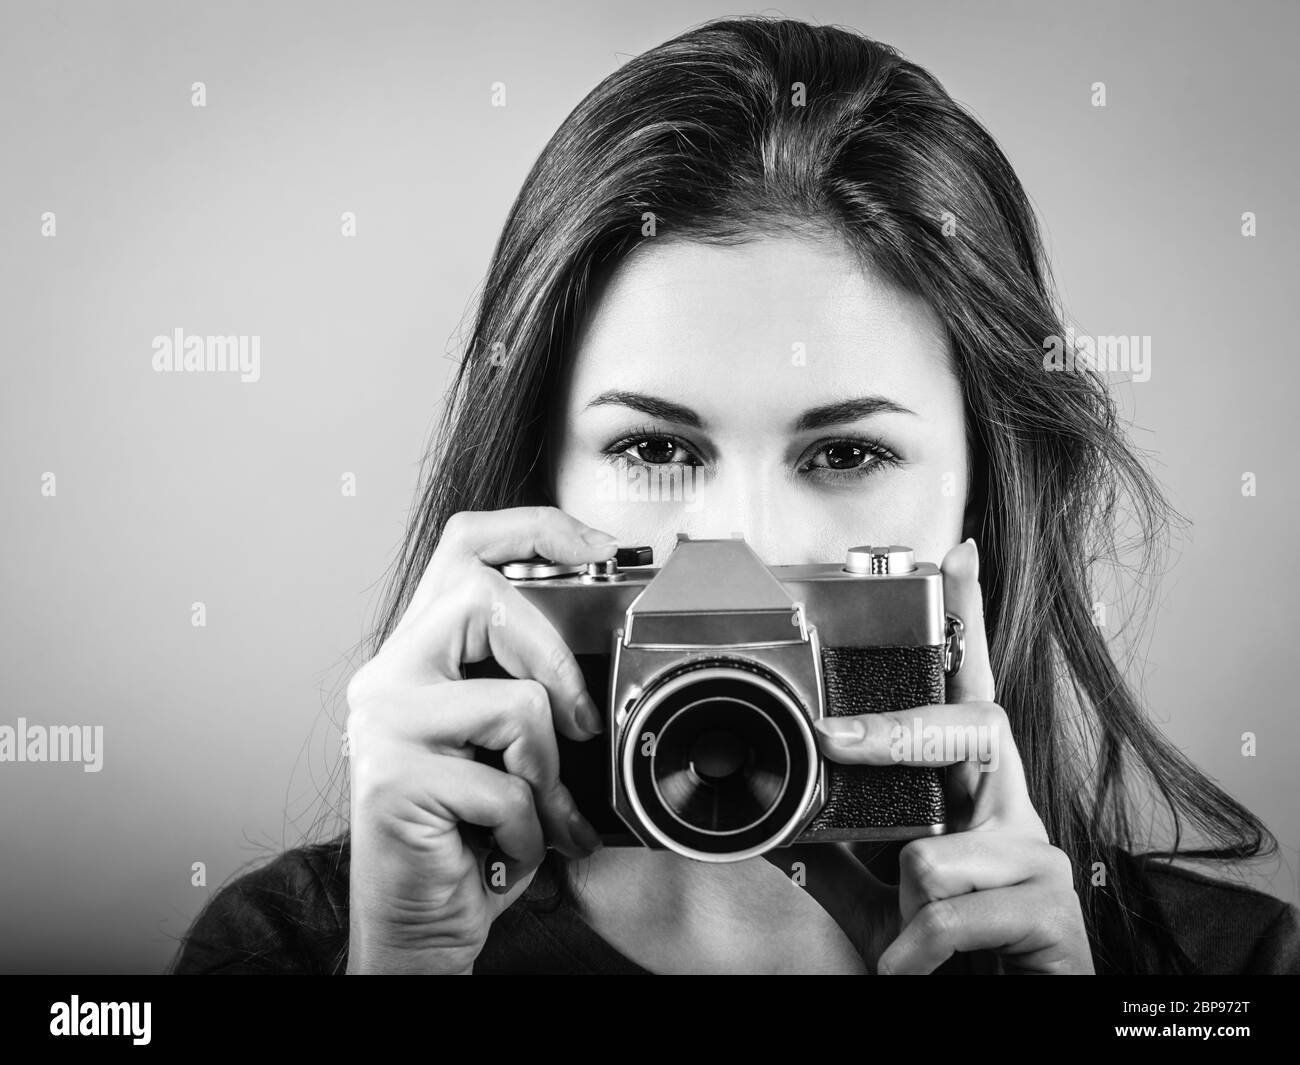 Photo of a beautiful woman pointing a vintage camera done in black and white. Stock Photo